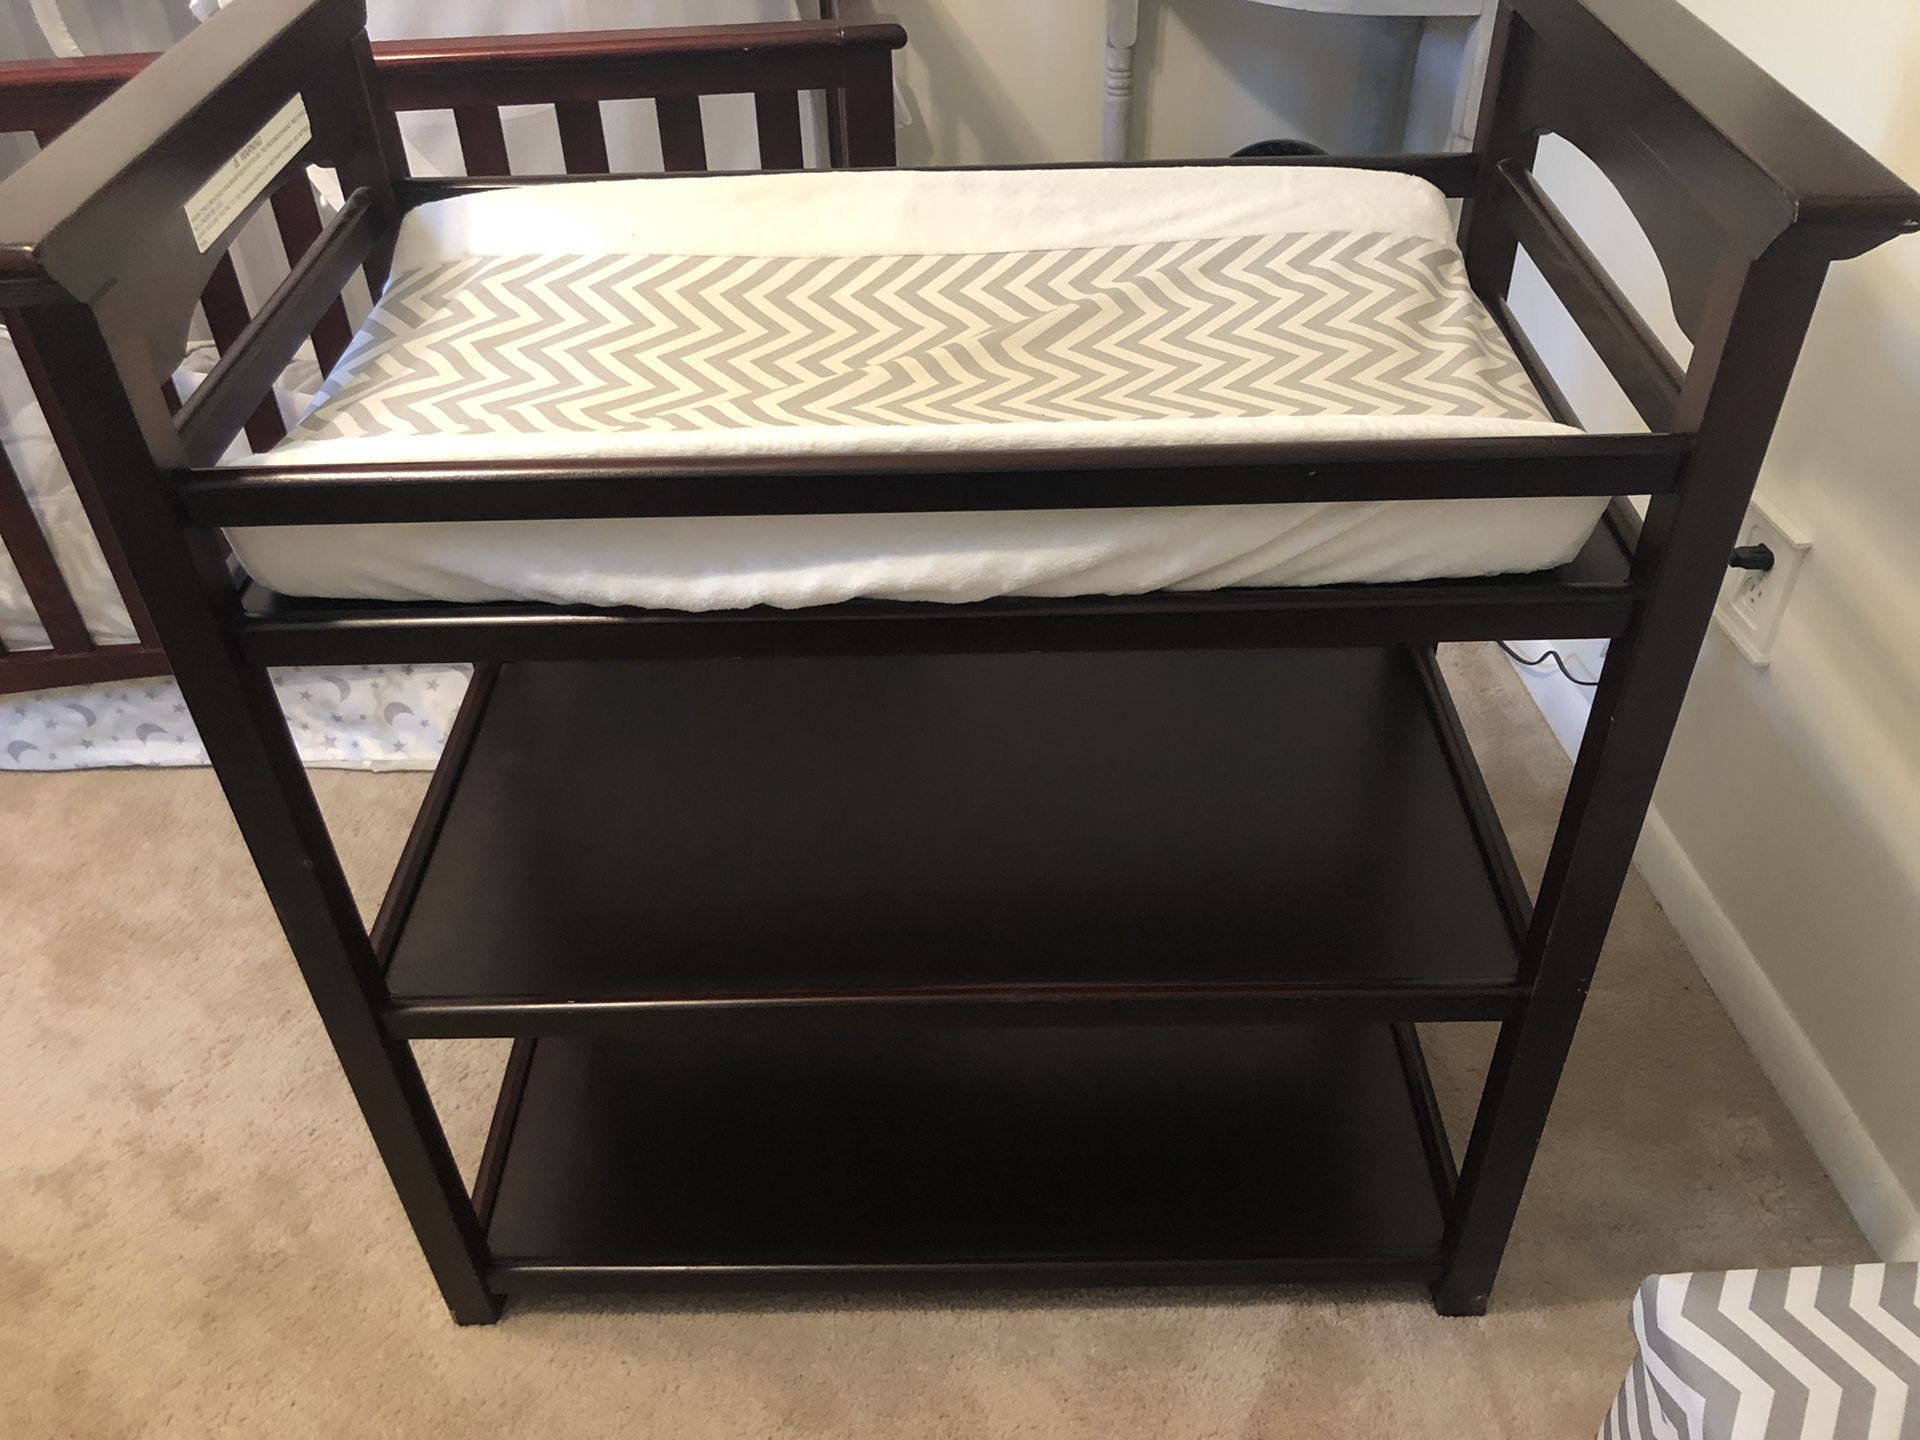 Graco changing table